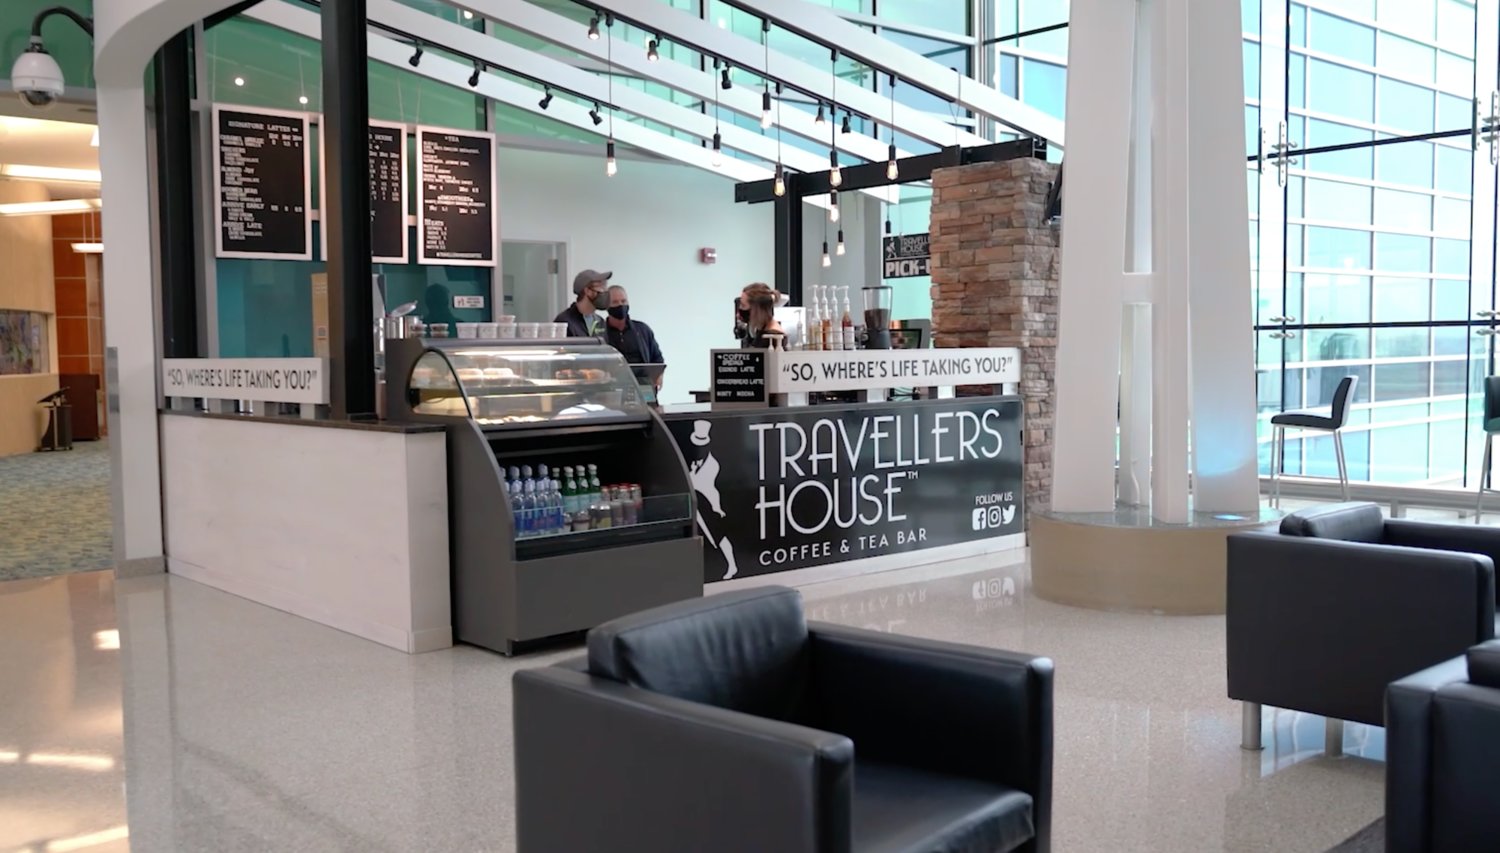 Travellers House is serving up beverages just past the Transportation Security Administration checkpoint.